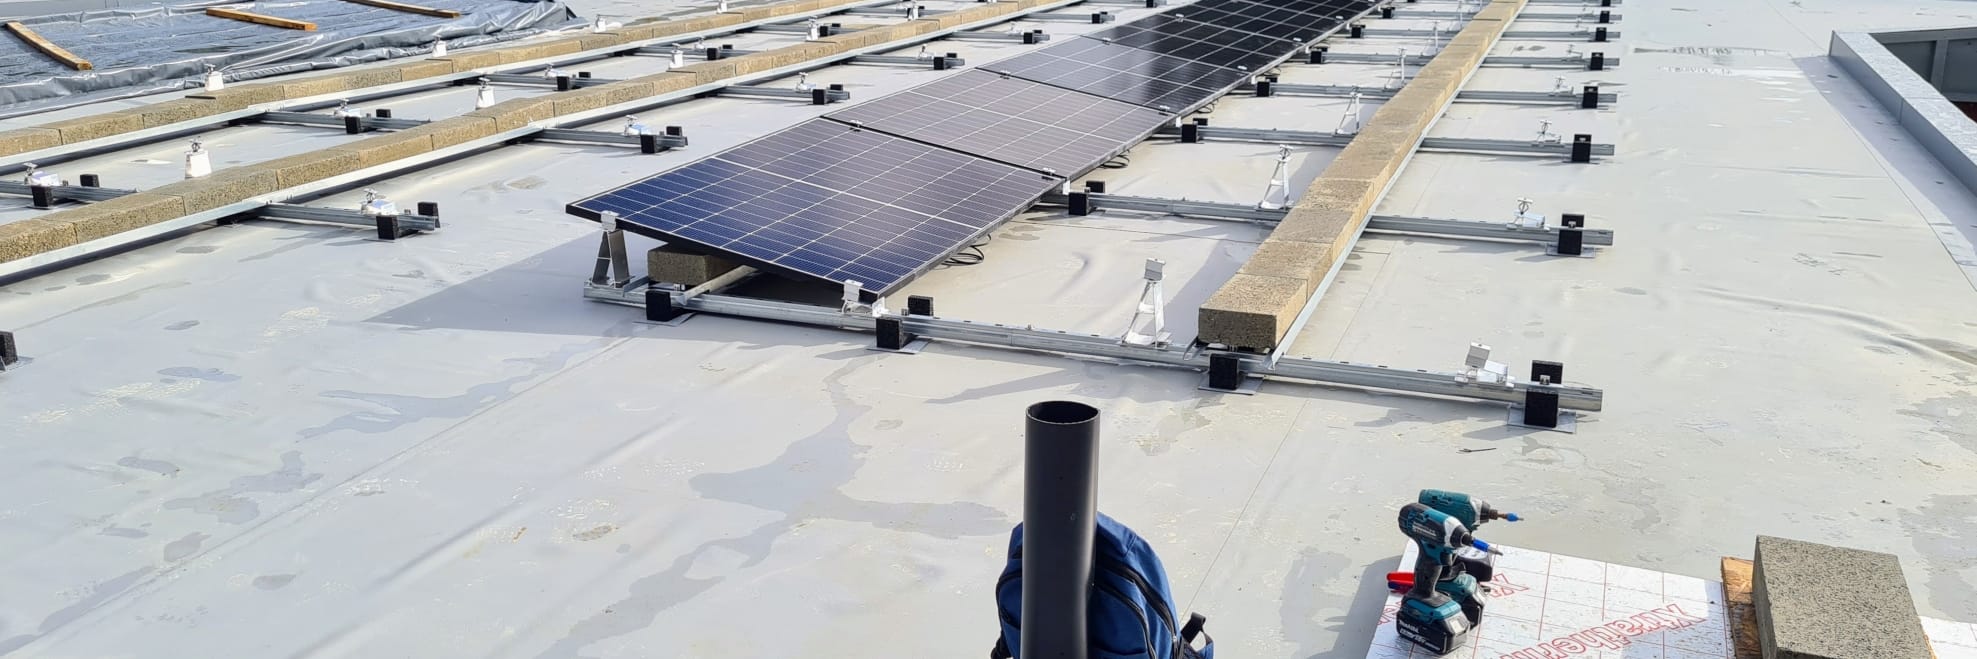 Solar mounting equipment on a flat roof